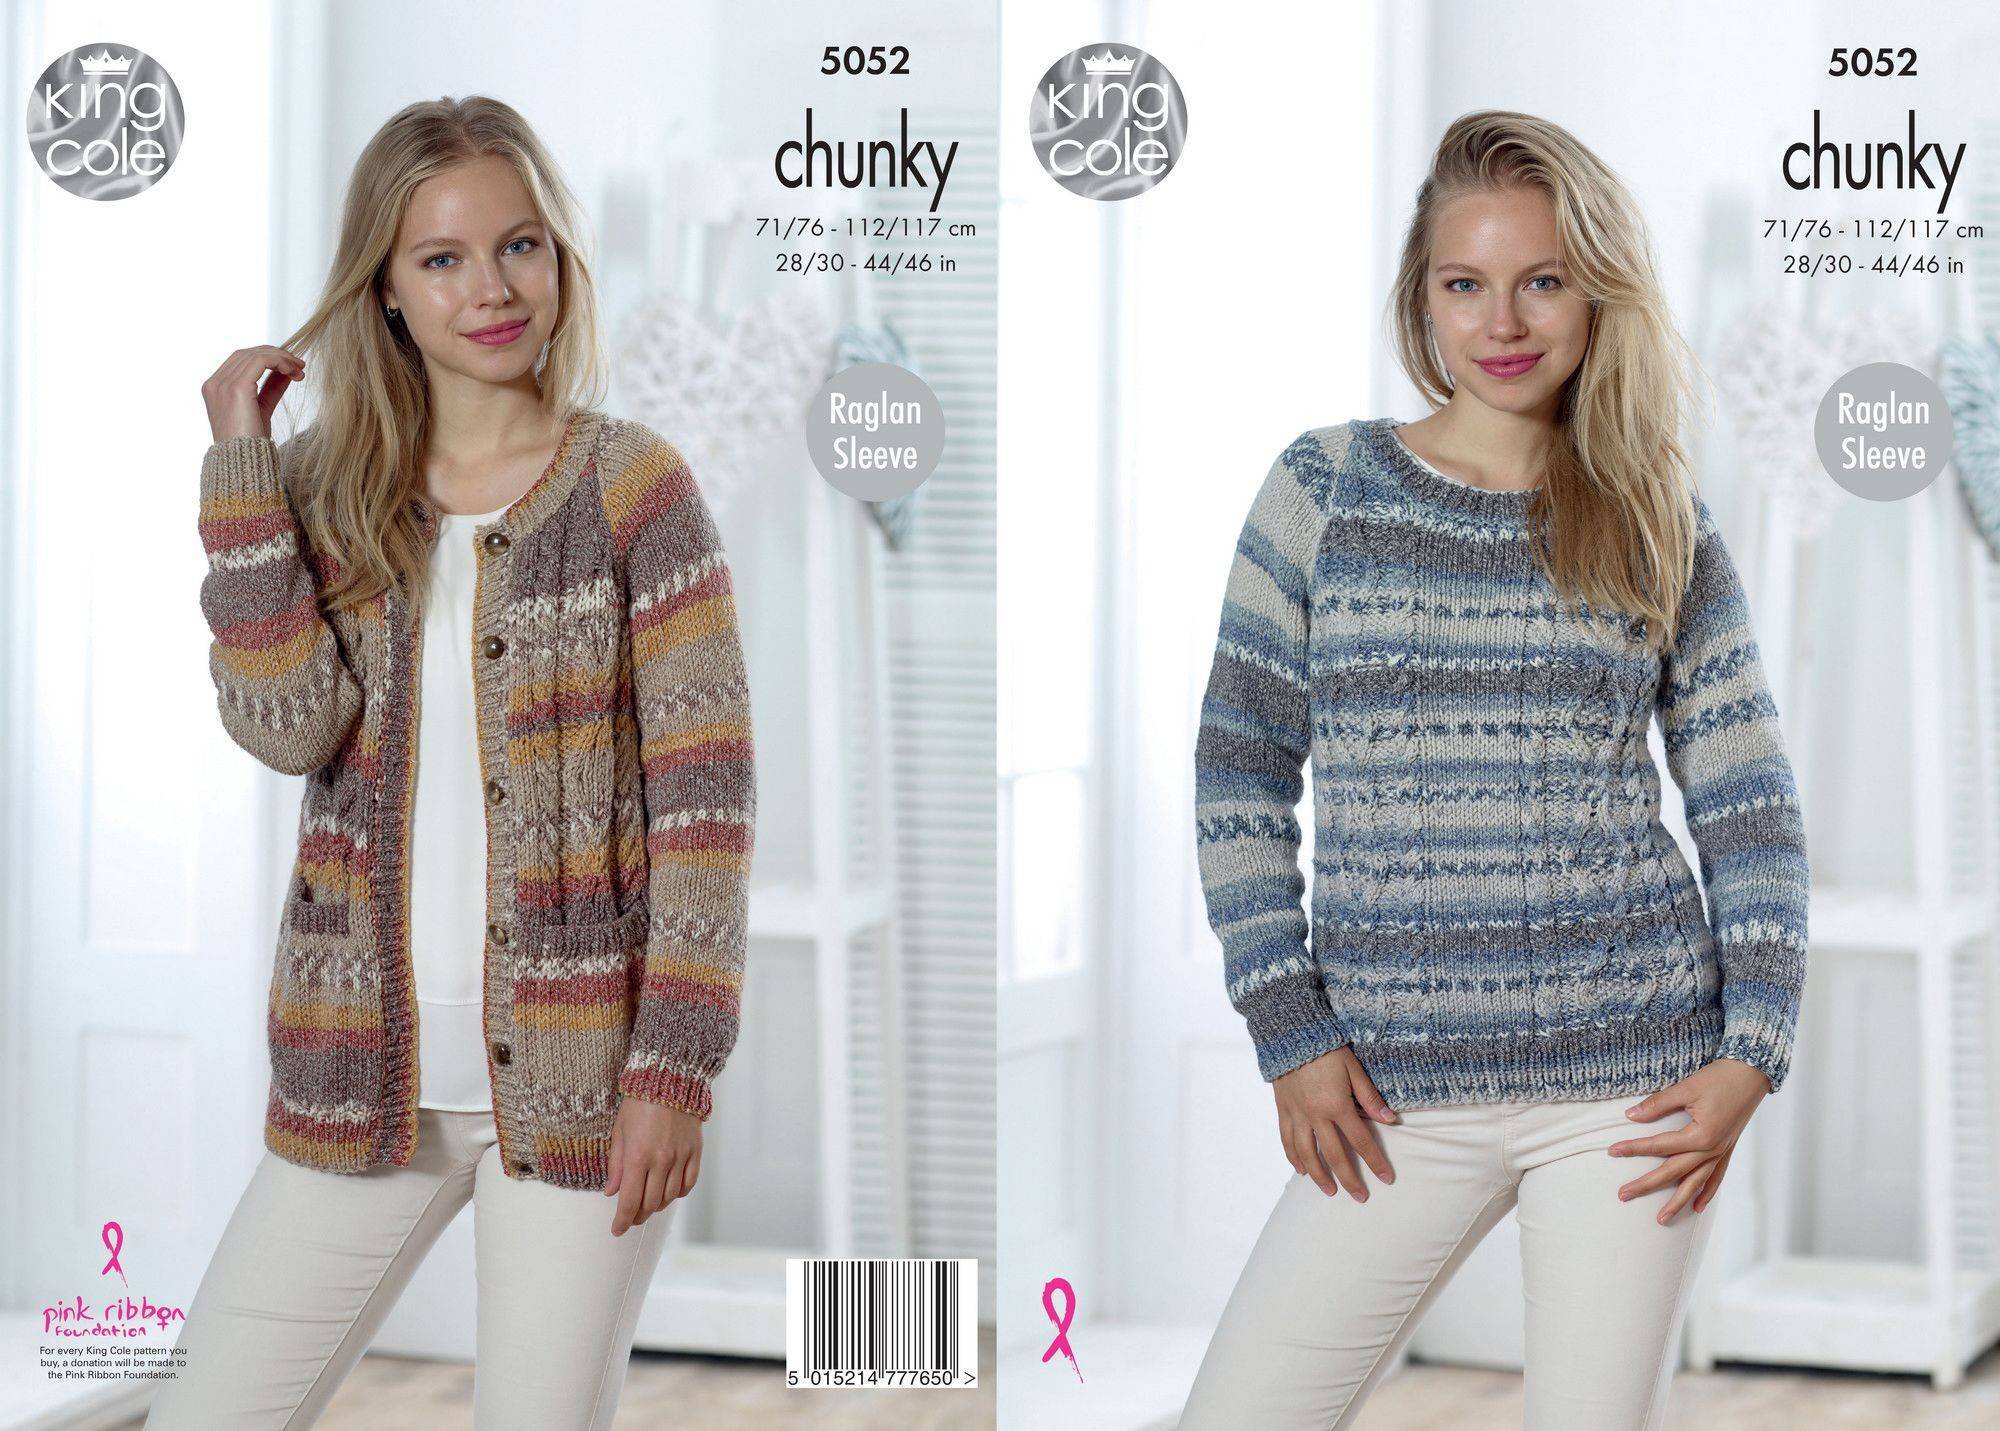 Cardigan and Sweater in King Cole Drifter Chunky (5052) | The Knitting ...